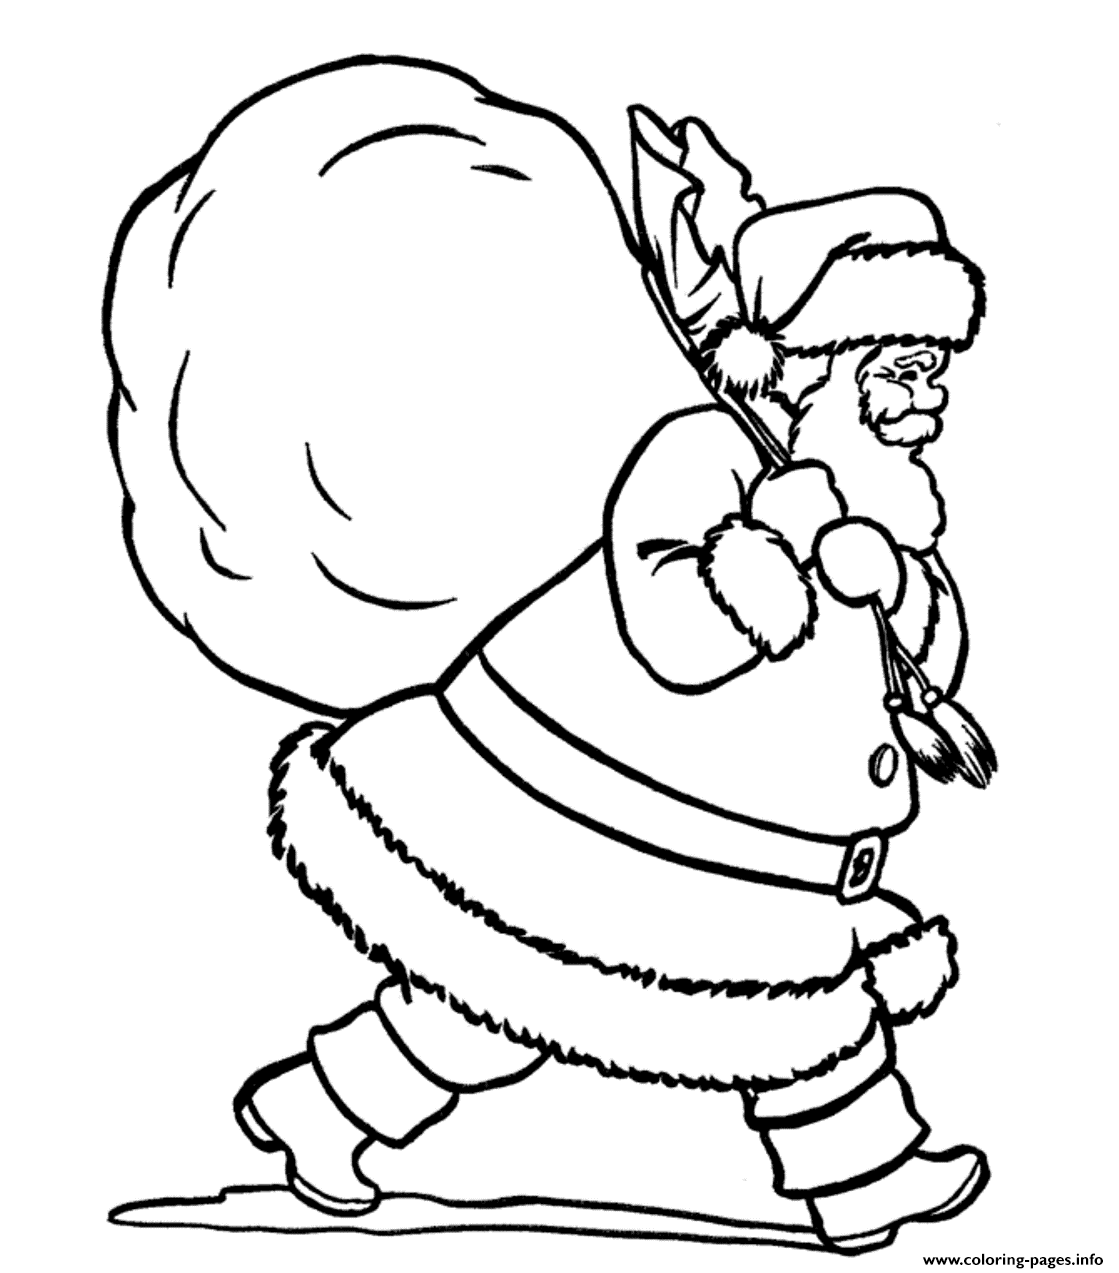 Santa Delivering Gifts For Christmas S Printable31a8 coloring